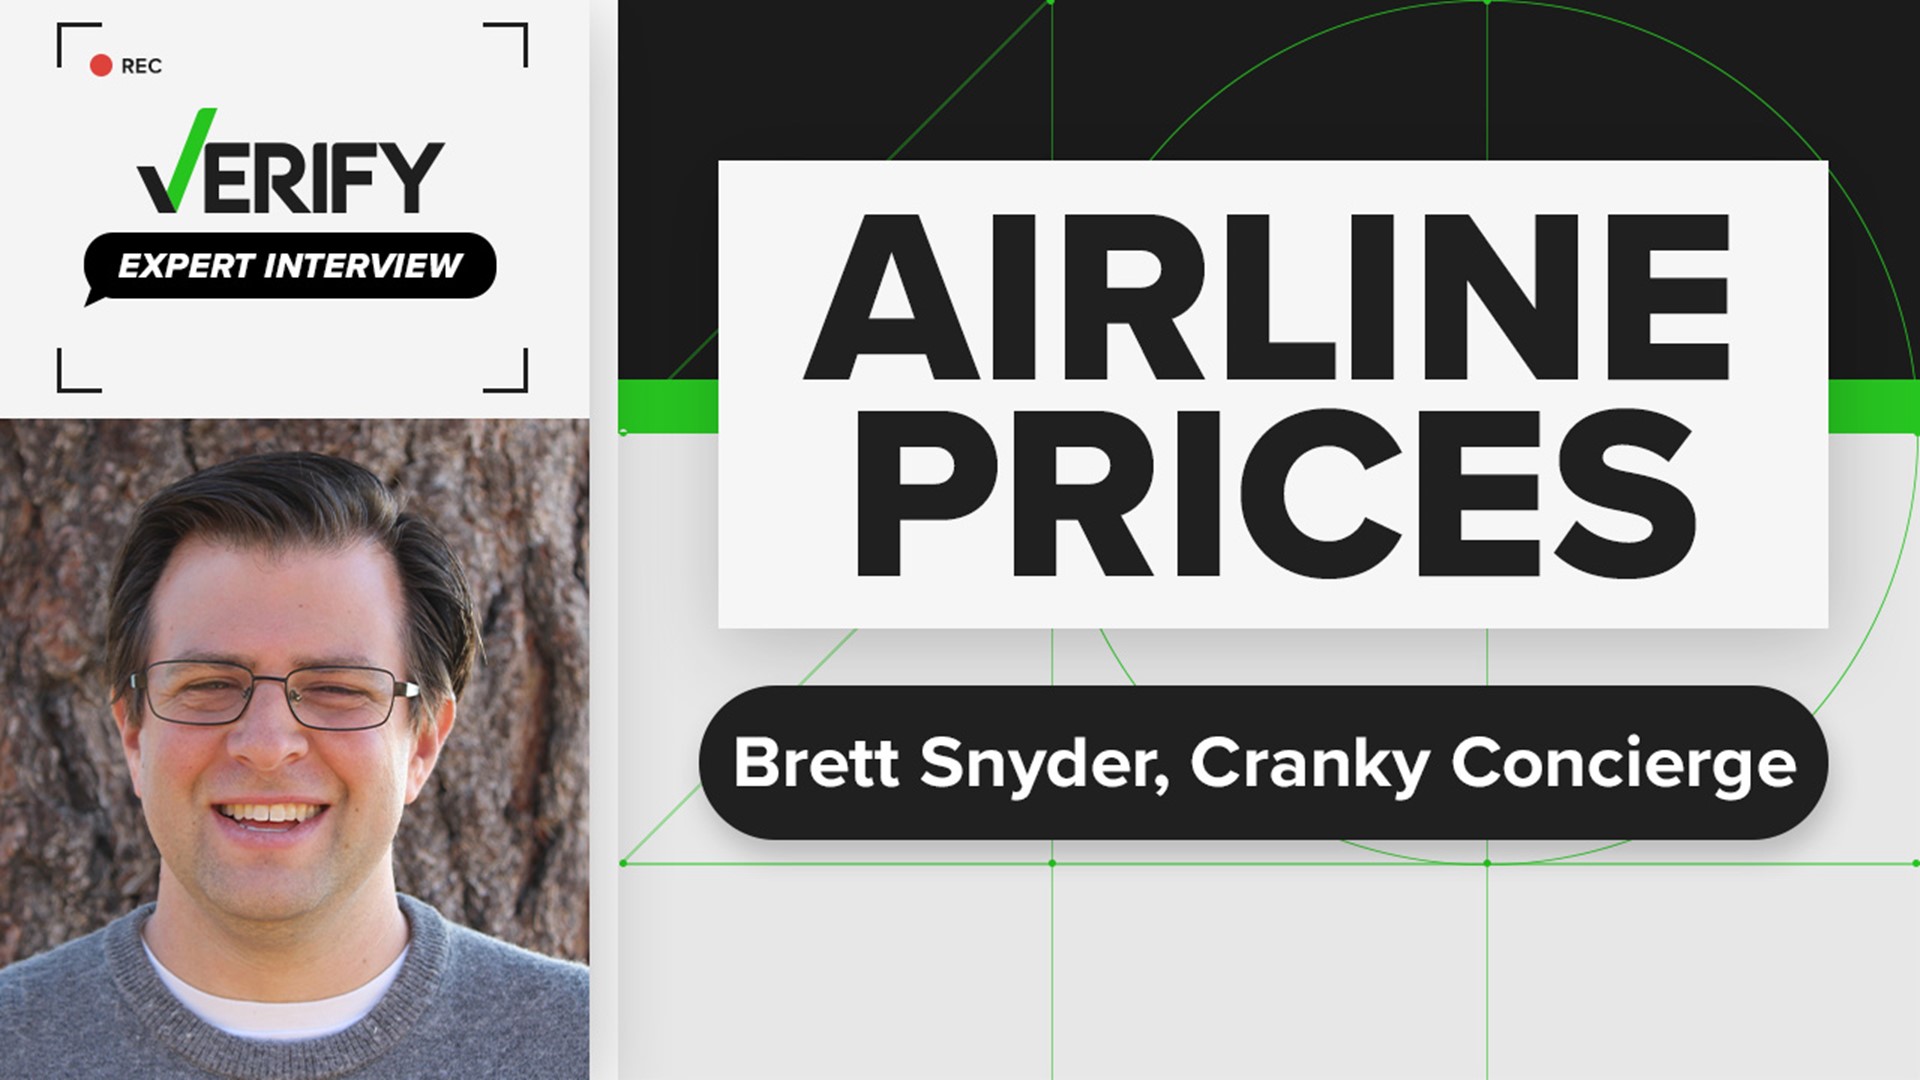 Brett Snyder is the President of Cranky Concierge, an air travel assistance website. He chatted with the VERIFY team about the claims people have that Tuesday is the